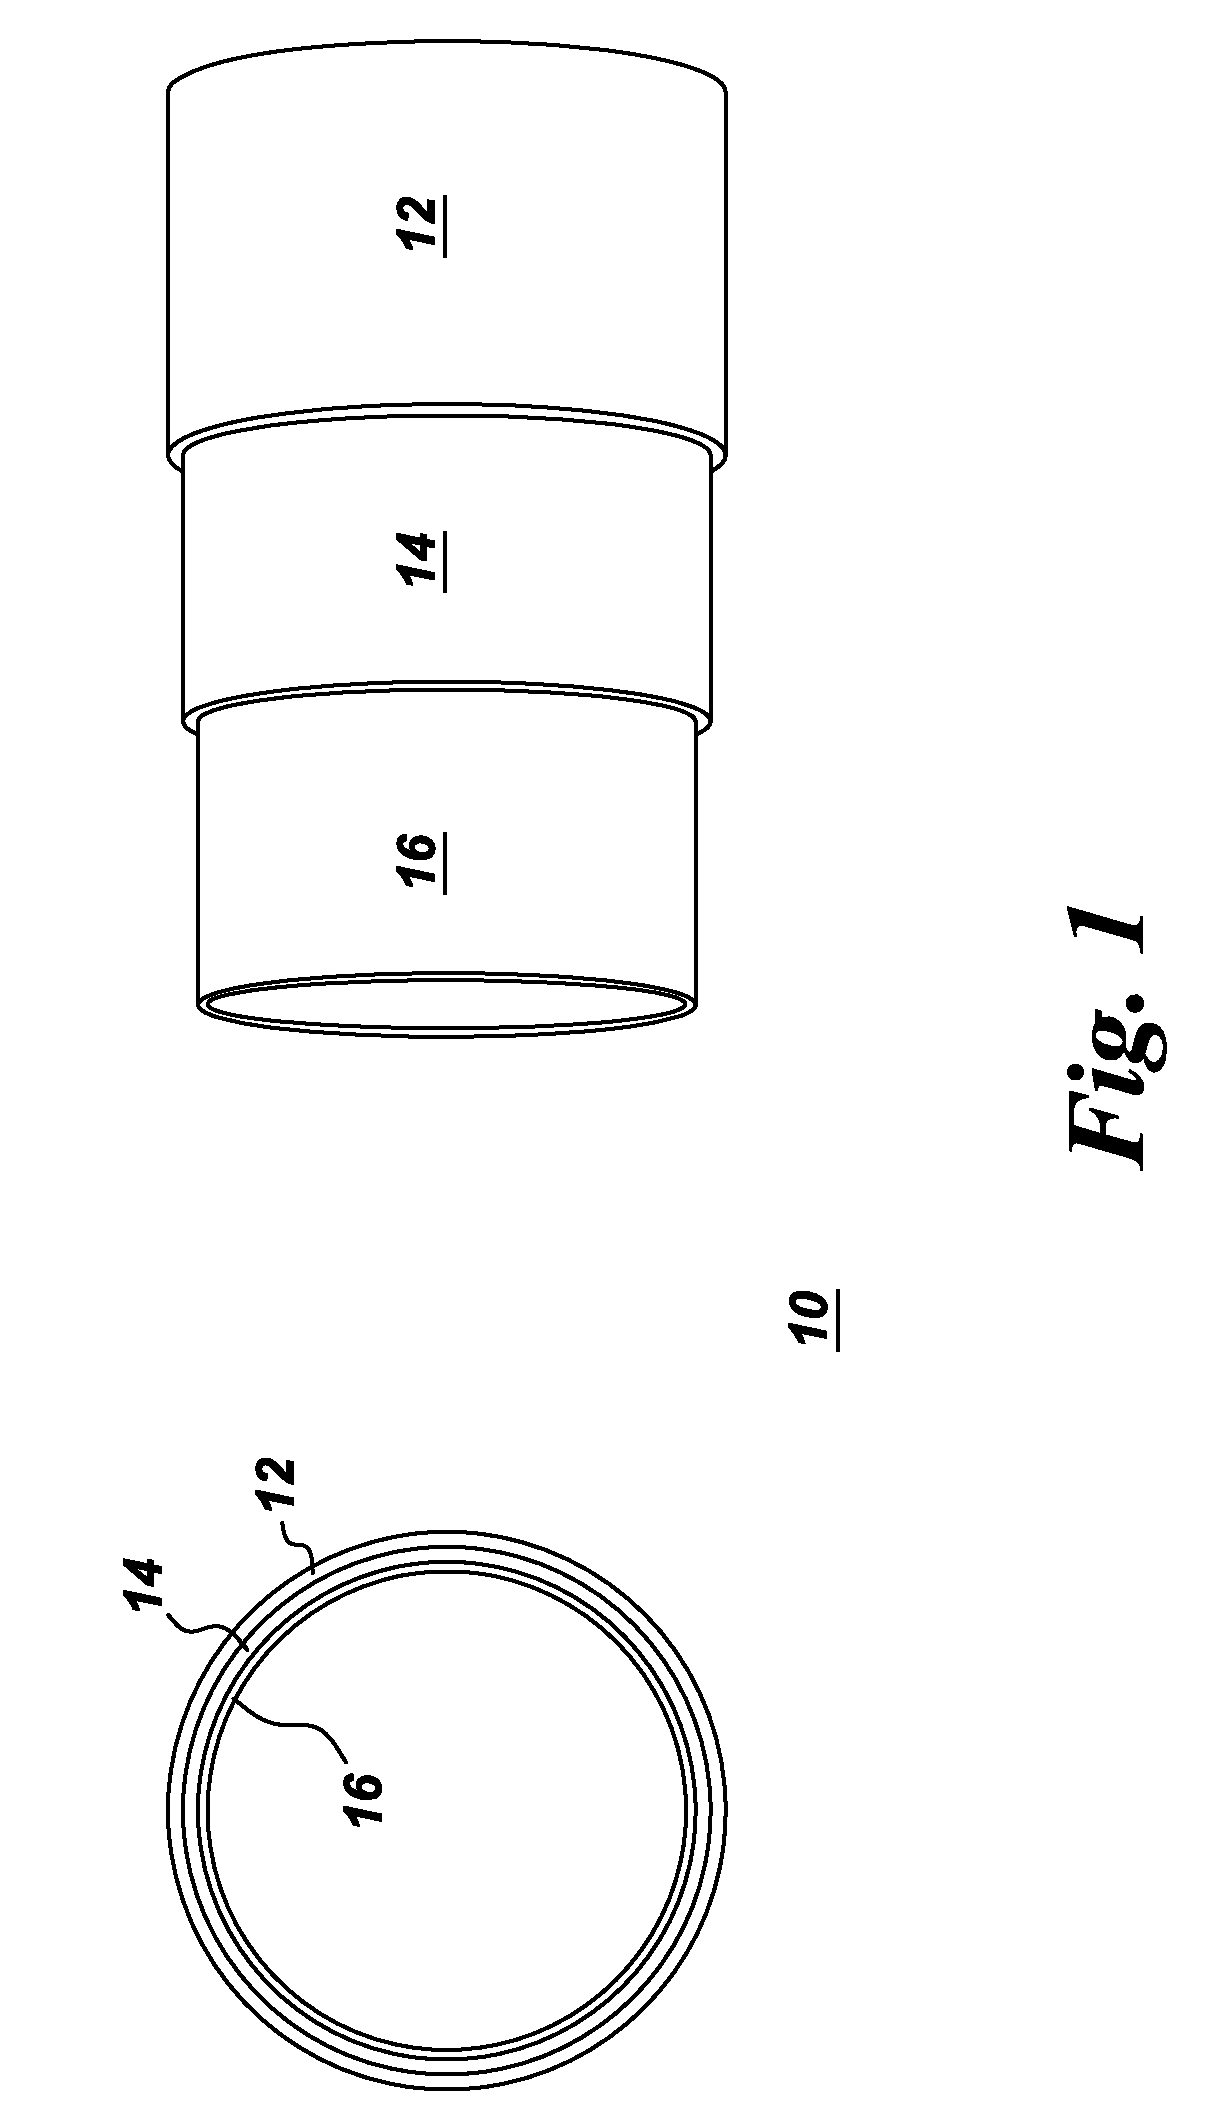 Ultrasound catheter housing with electromagnetic shielding properties and methods of manufacture